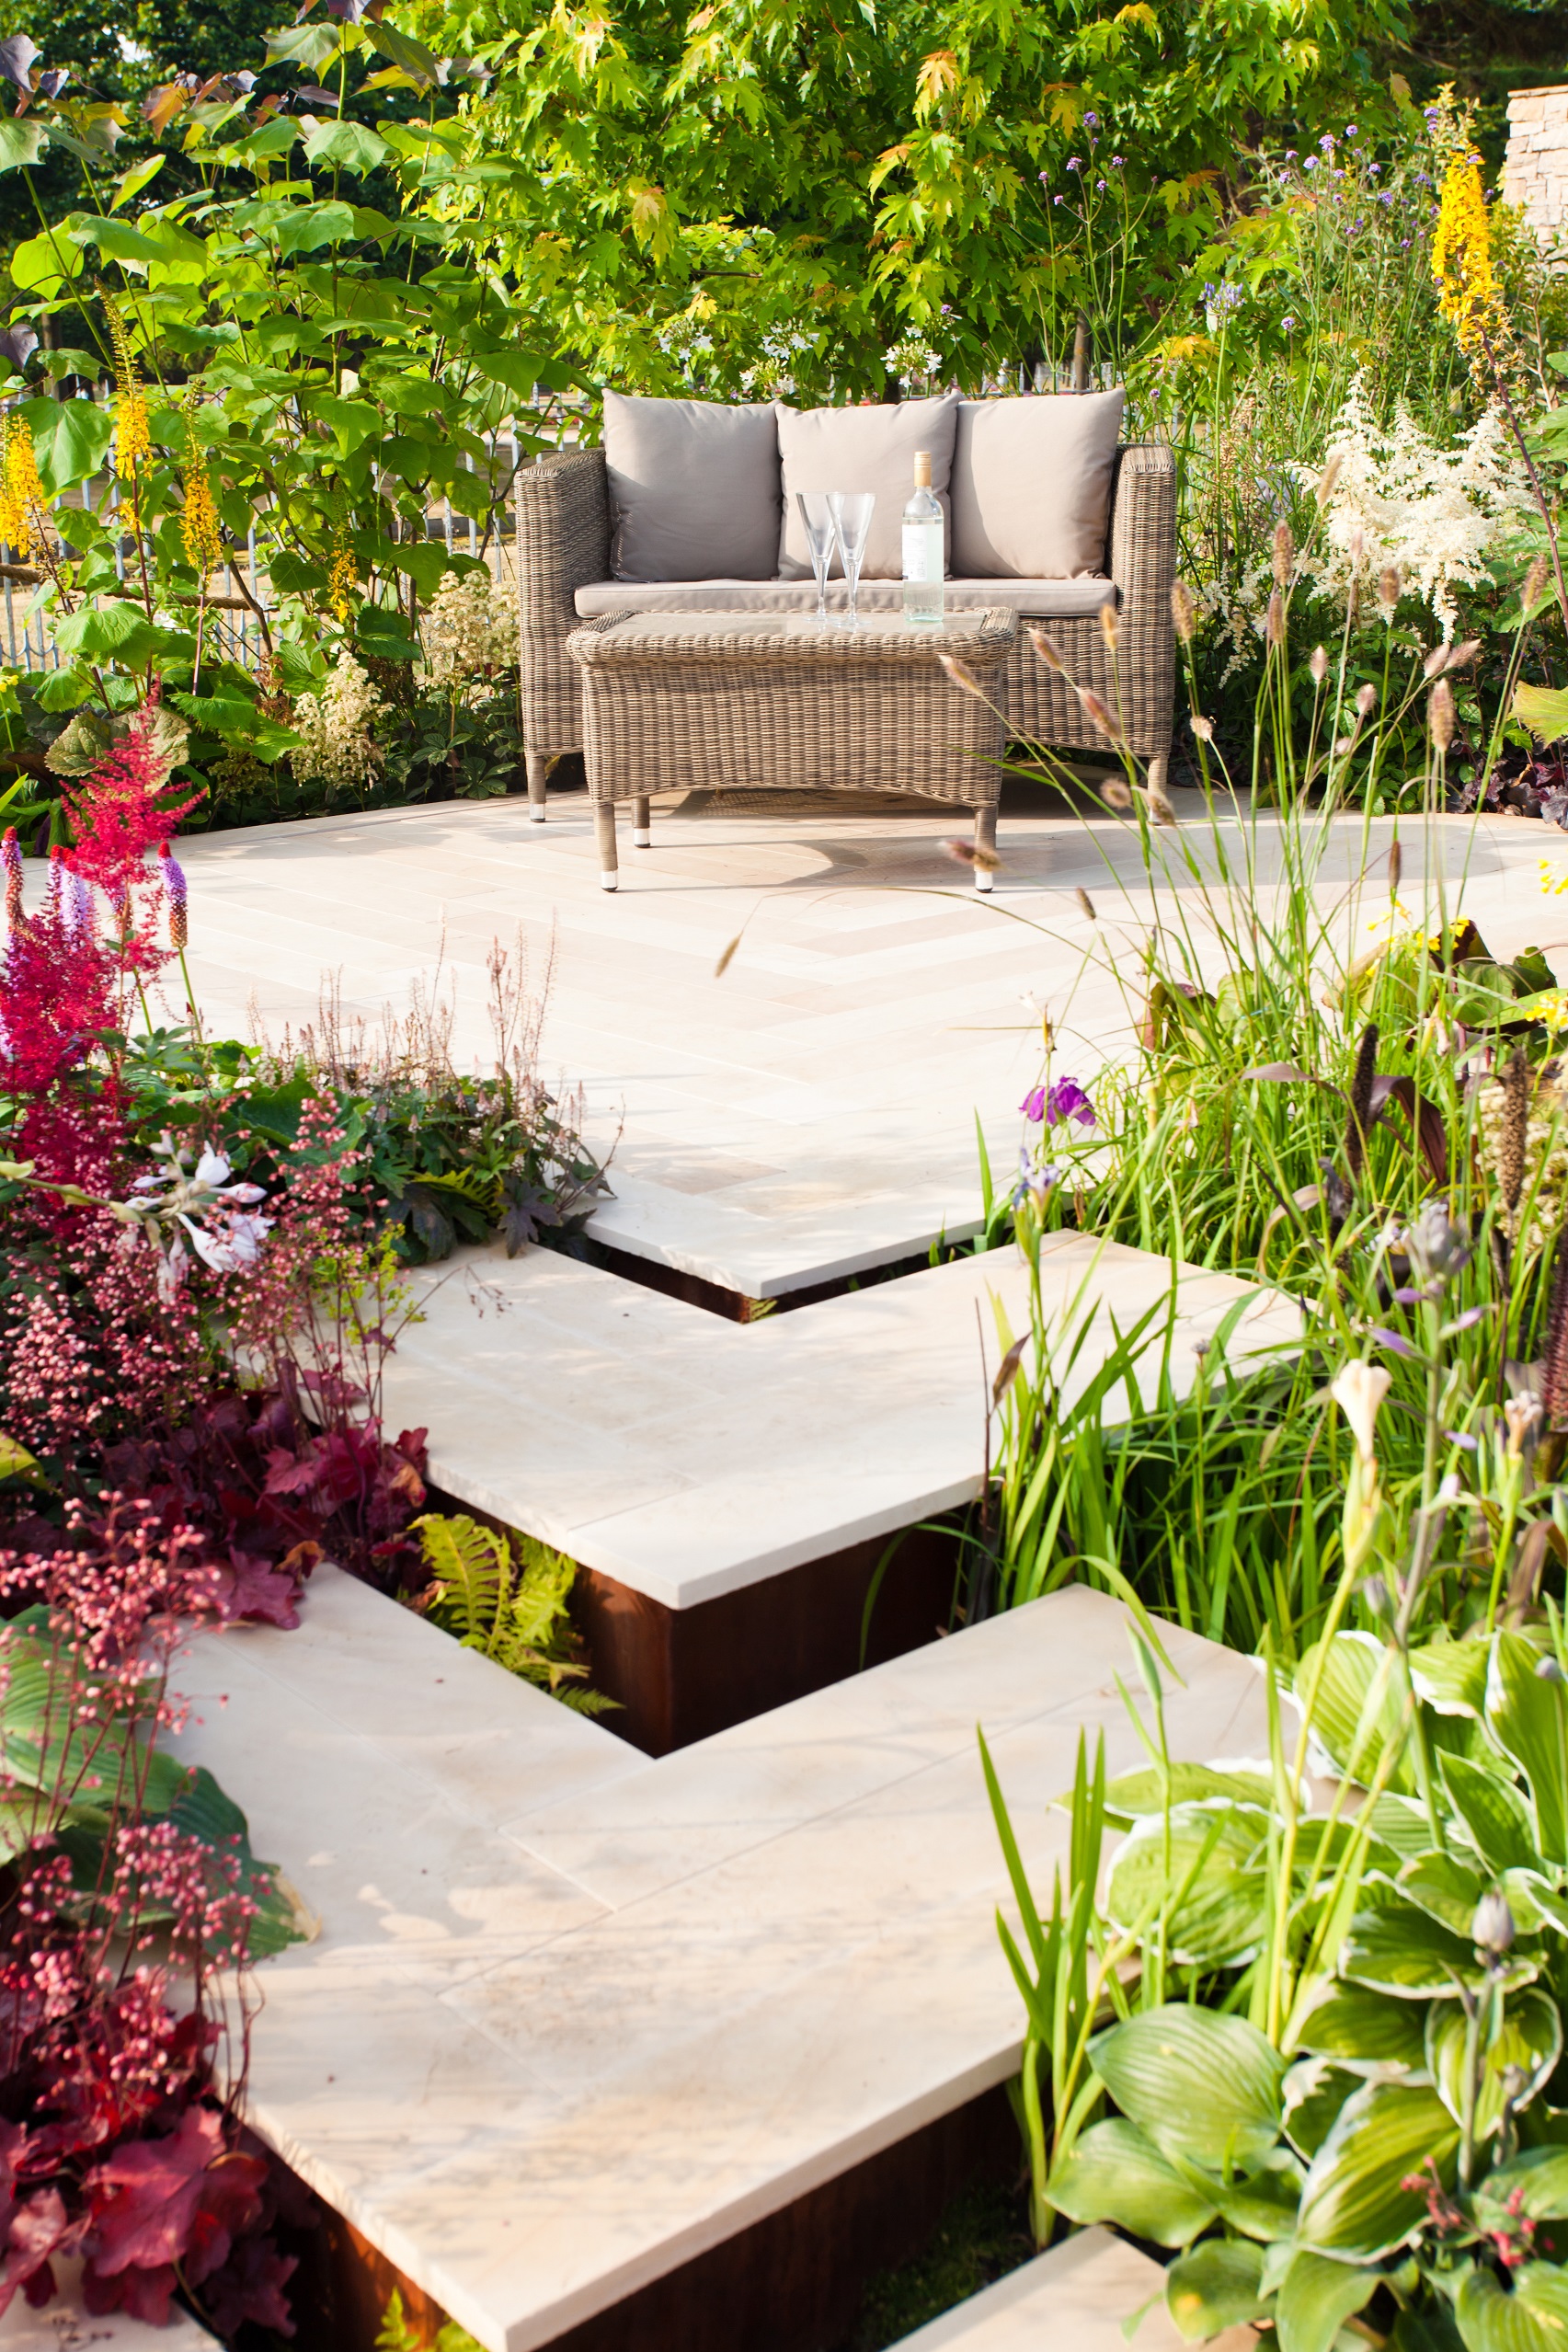 Landscape design – Create your own cosy outdoor nook!